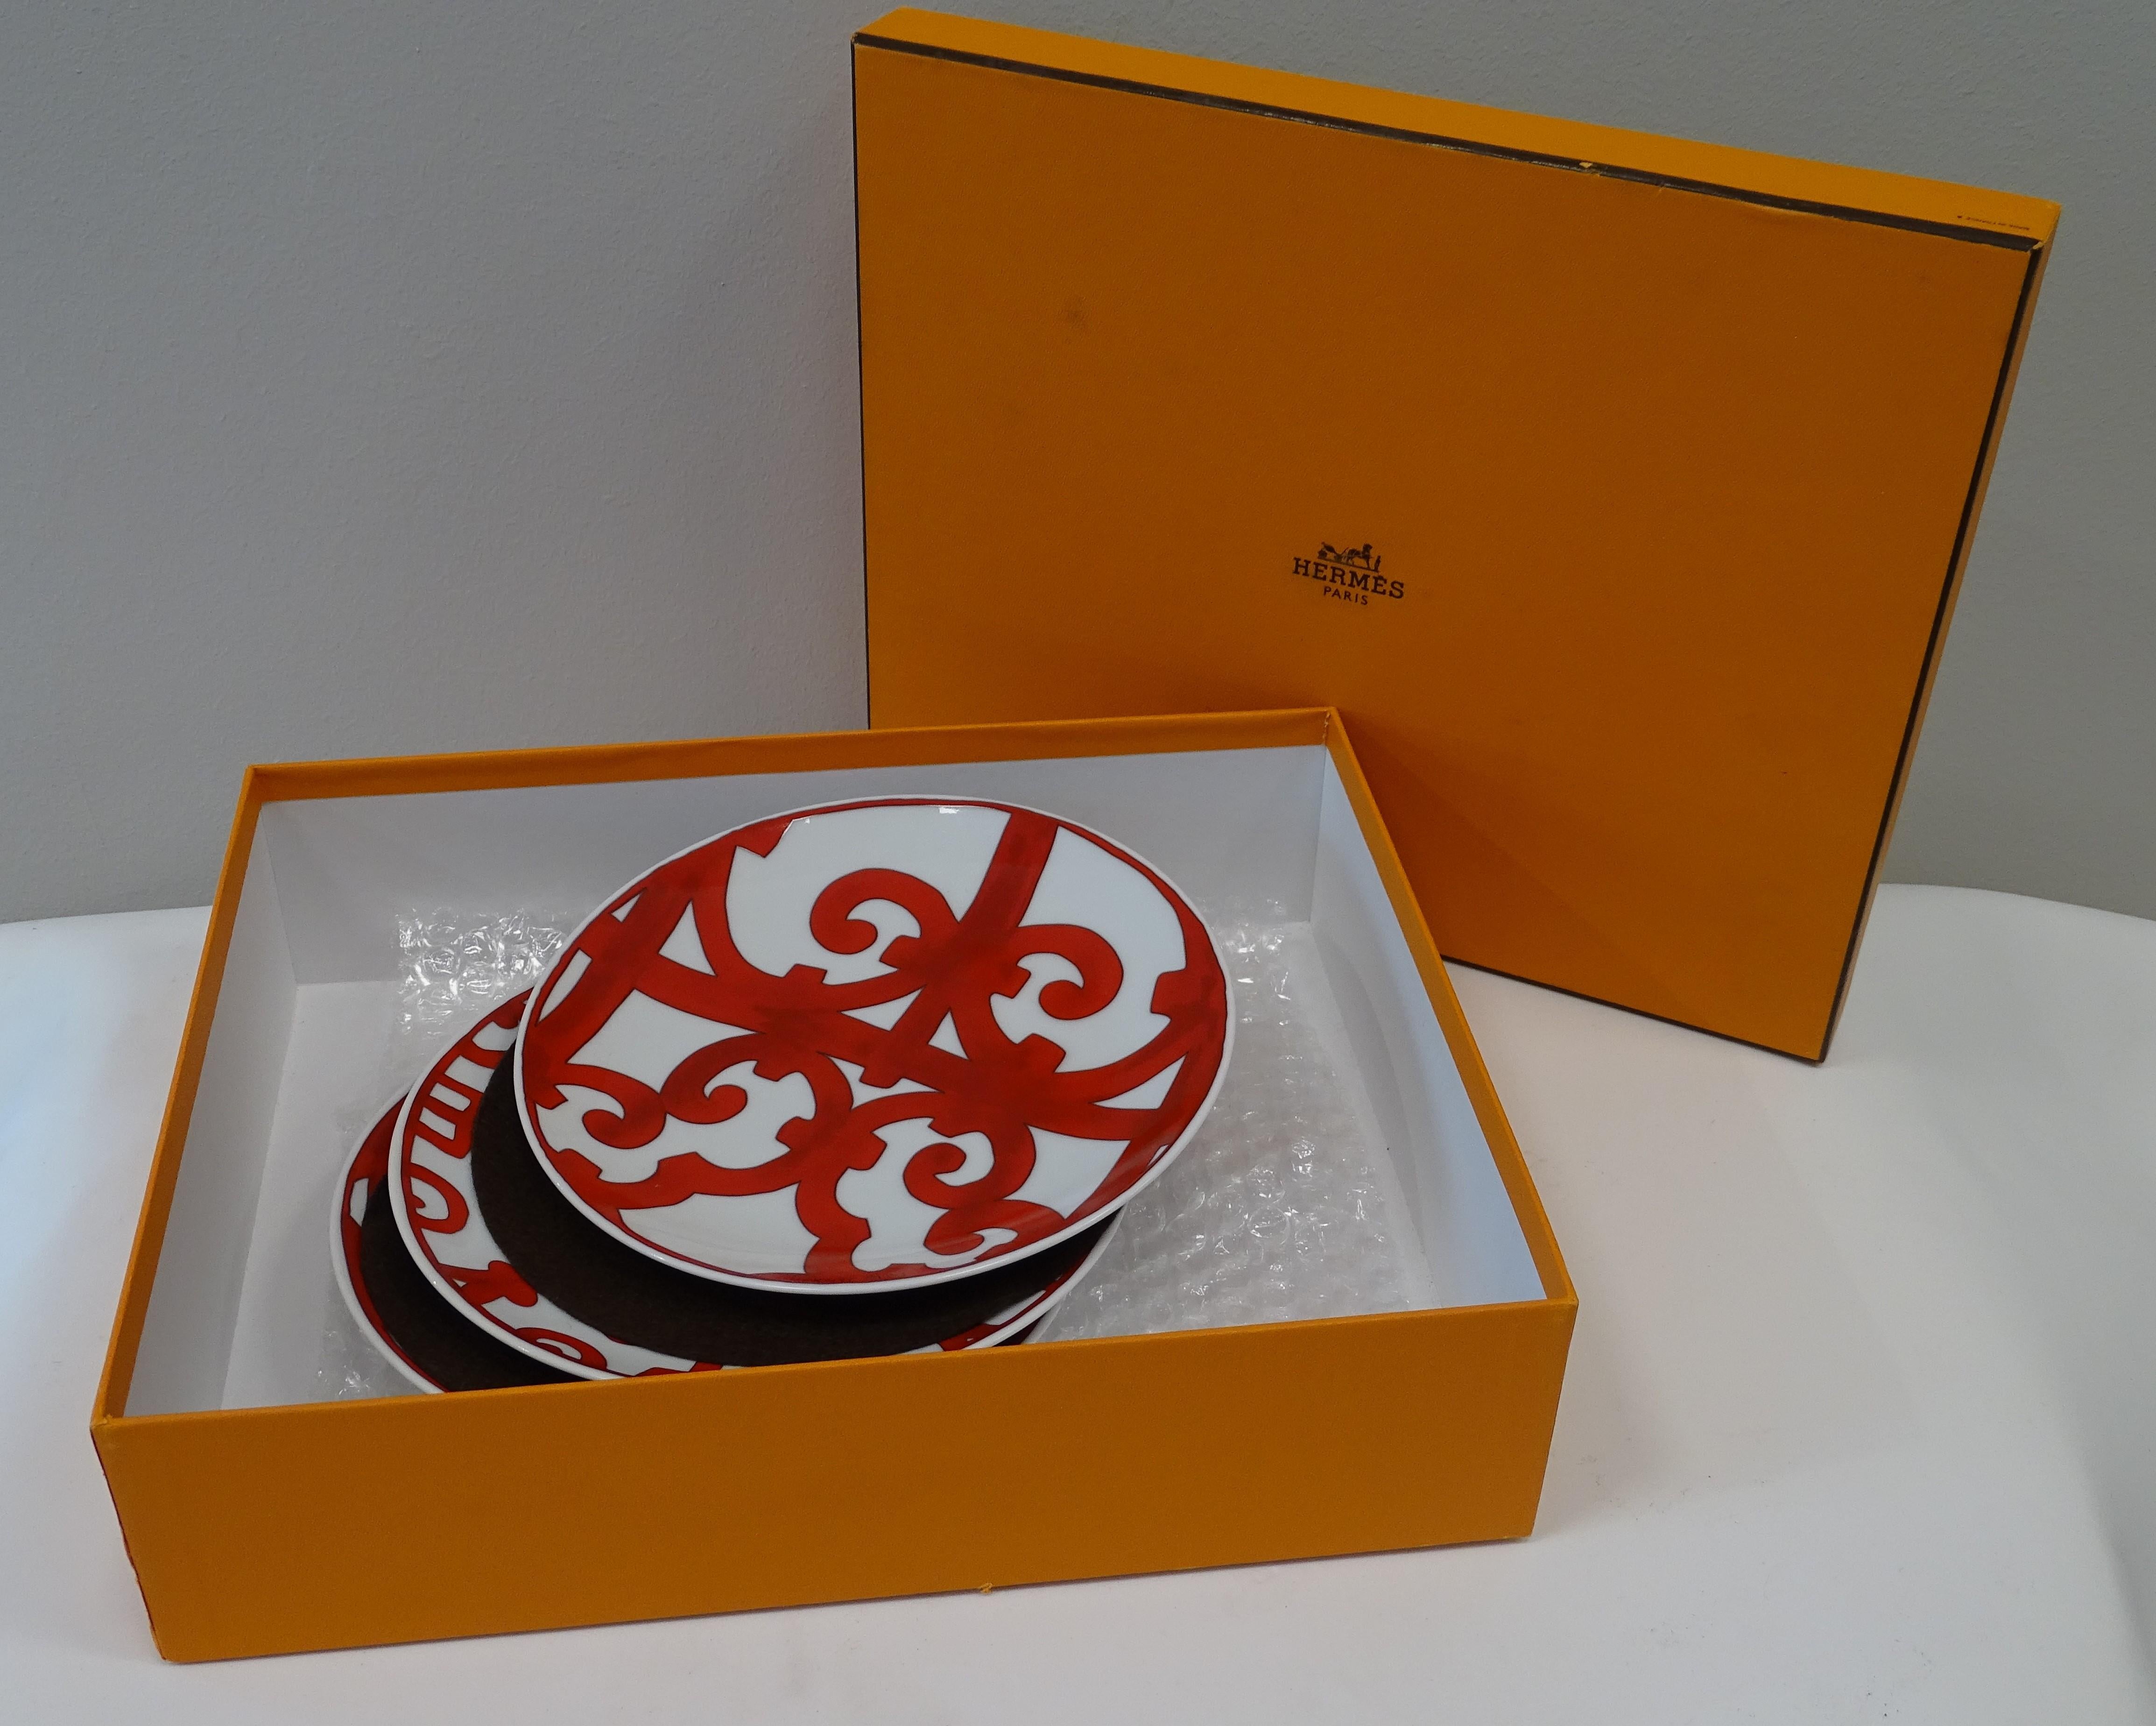 Hermes Set of Orange 3 Dishes, with the Box 10